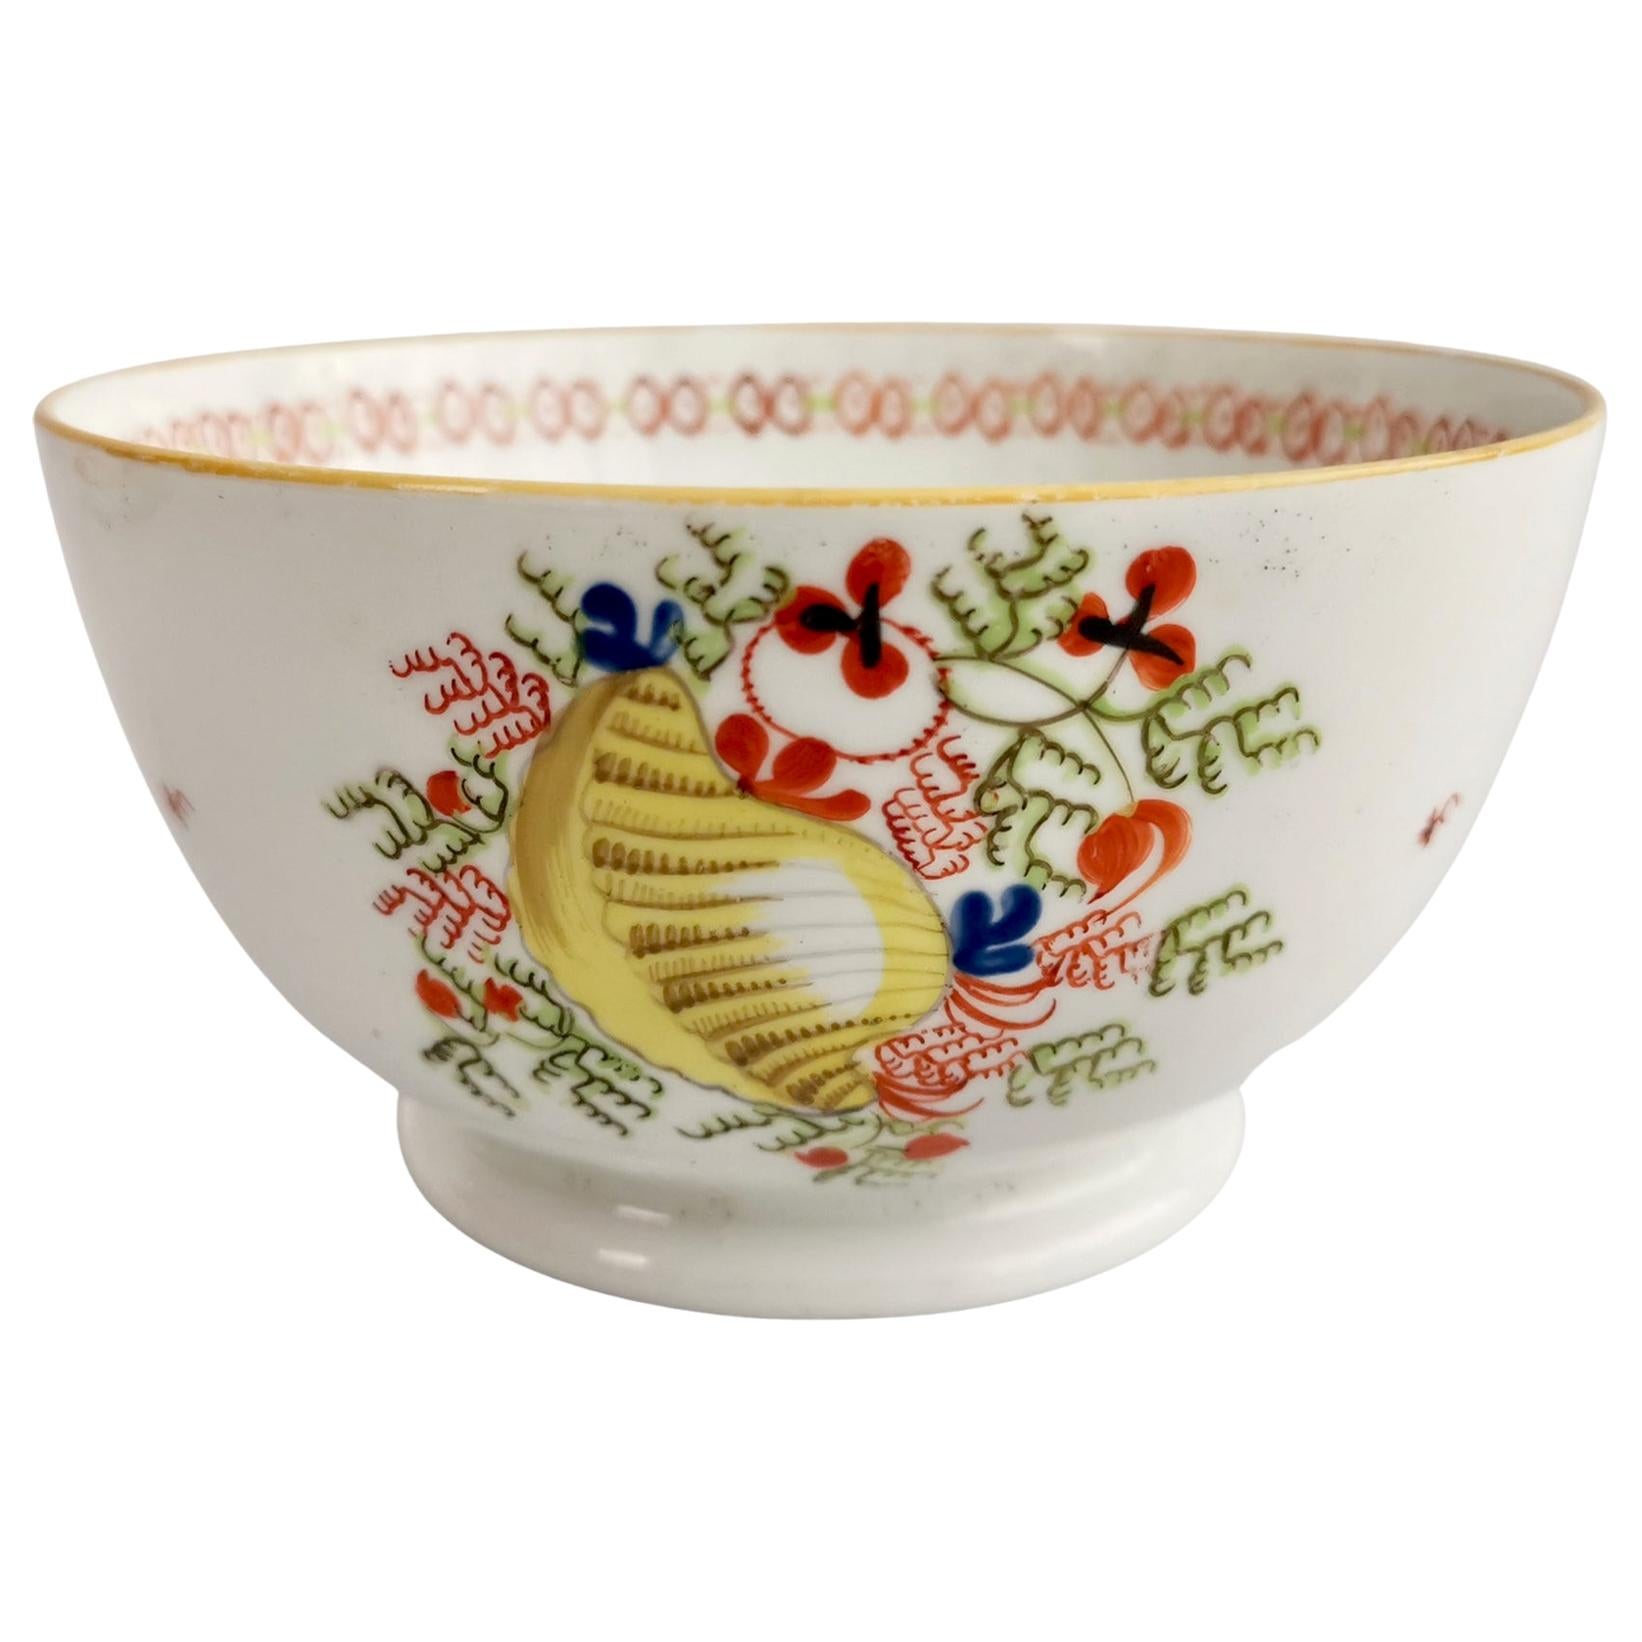 New Hall Porcelain Slop Bowl, Yellow Shell Pattern 1045, ca 1810